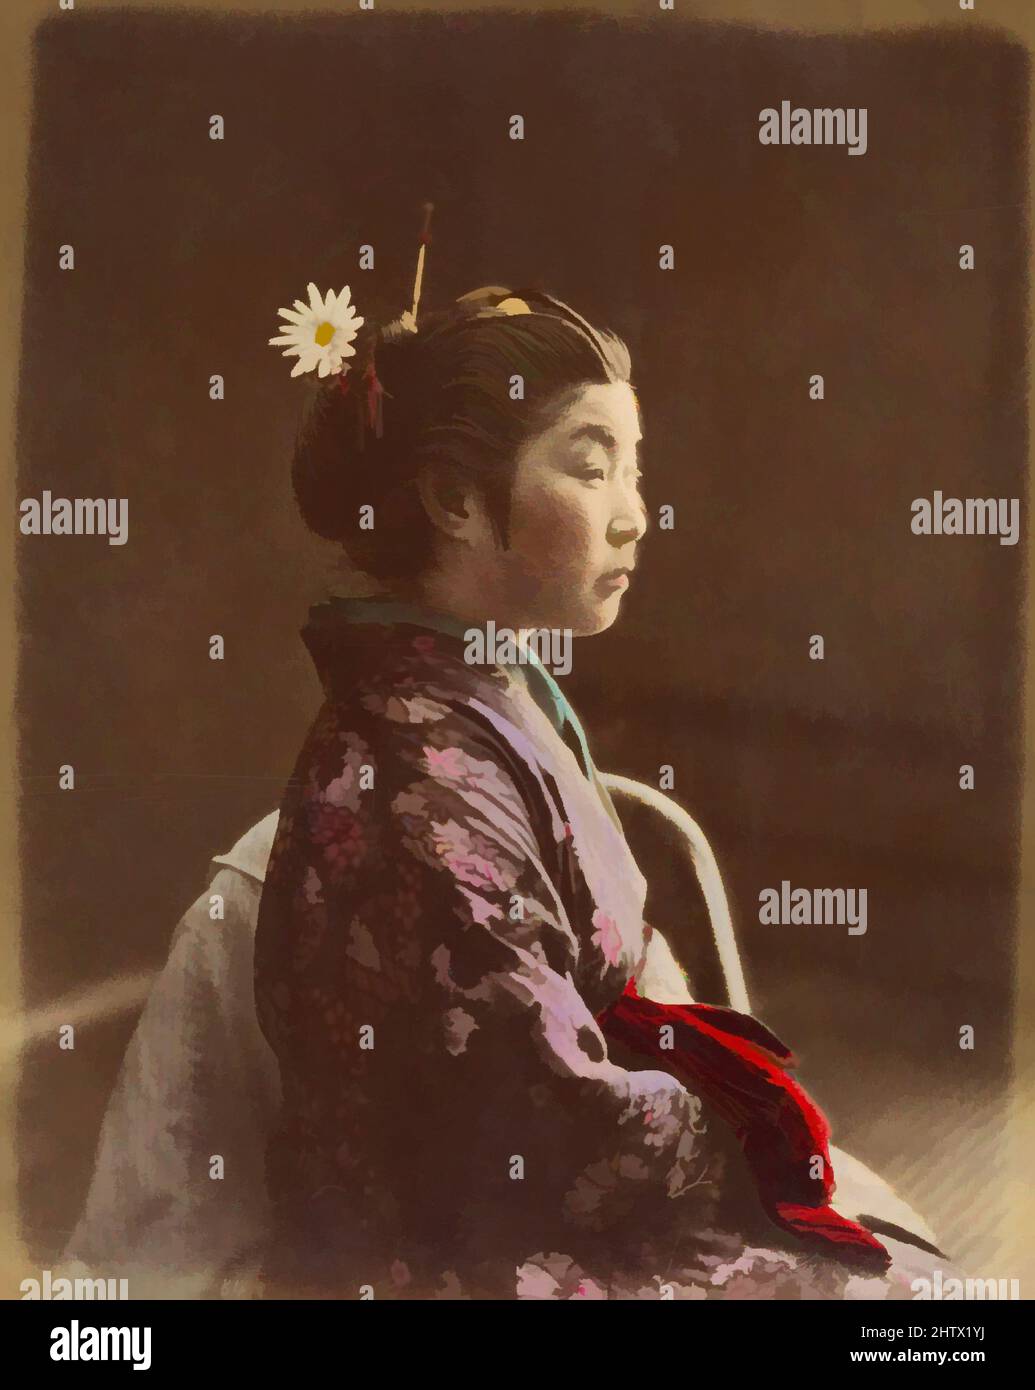 Art inspired by Tea House waitress, 1870s, Albumen silver print from glass negative, 25.1 x 20.2 cm (9 7/8 x 7 15/16 in.), Photographs, Suzuki Shin'ichi (Japanese, 1835–1919, Classic works modernized by Artotop with a splash of modernity. Shapes, color and value, eye-catching visual impact on art. Emotions through freedom of artworks in a contemporary way. A timeless message pursuing a wildly creative new direction. Artists turning to the digital medium and creating the Artotop NFT Stock Photo